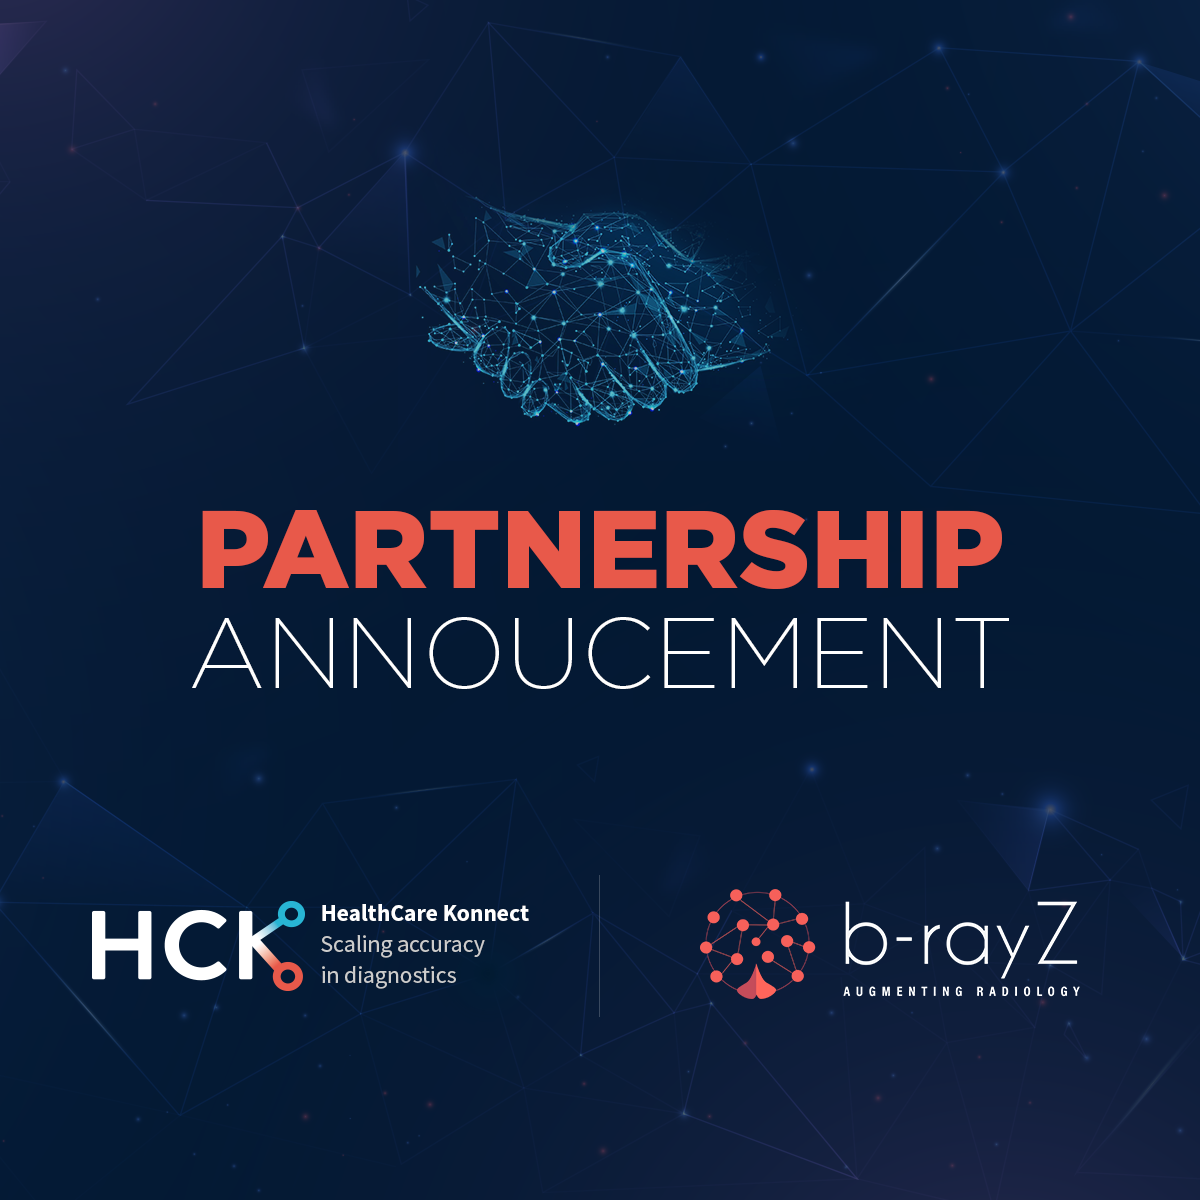 Partnership Announcement b-rayZ and HCK